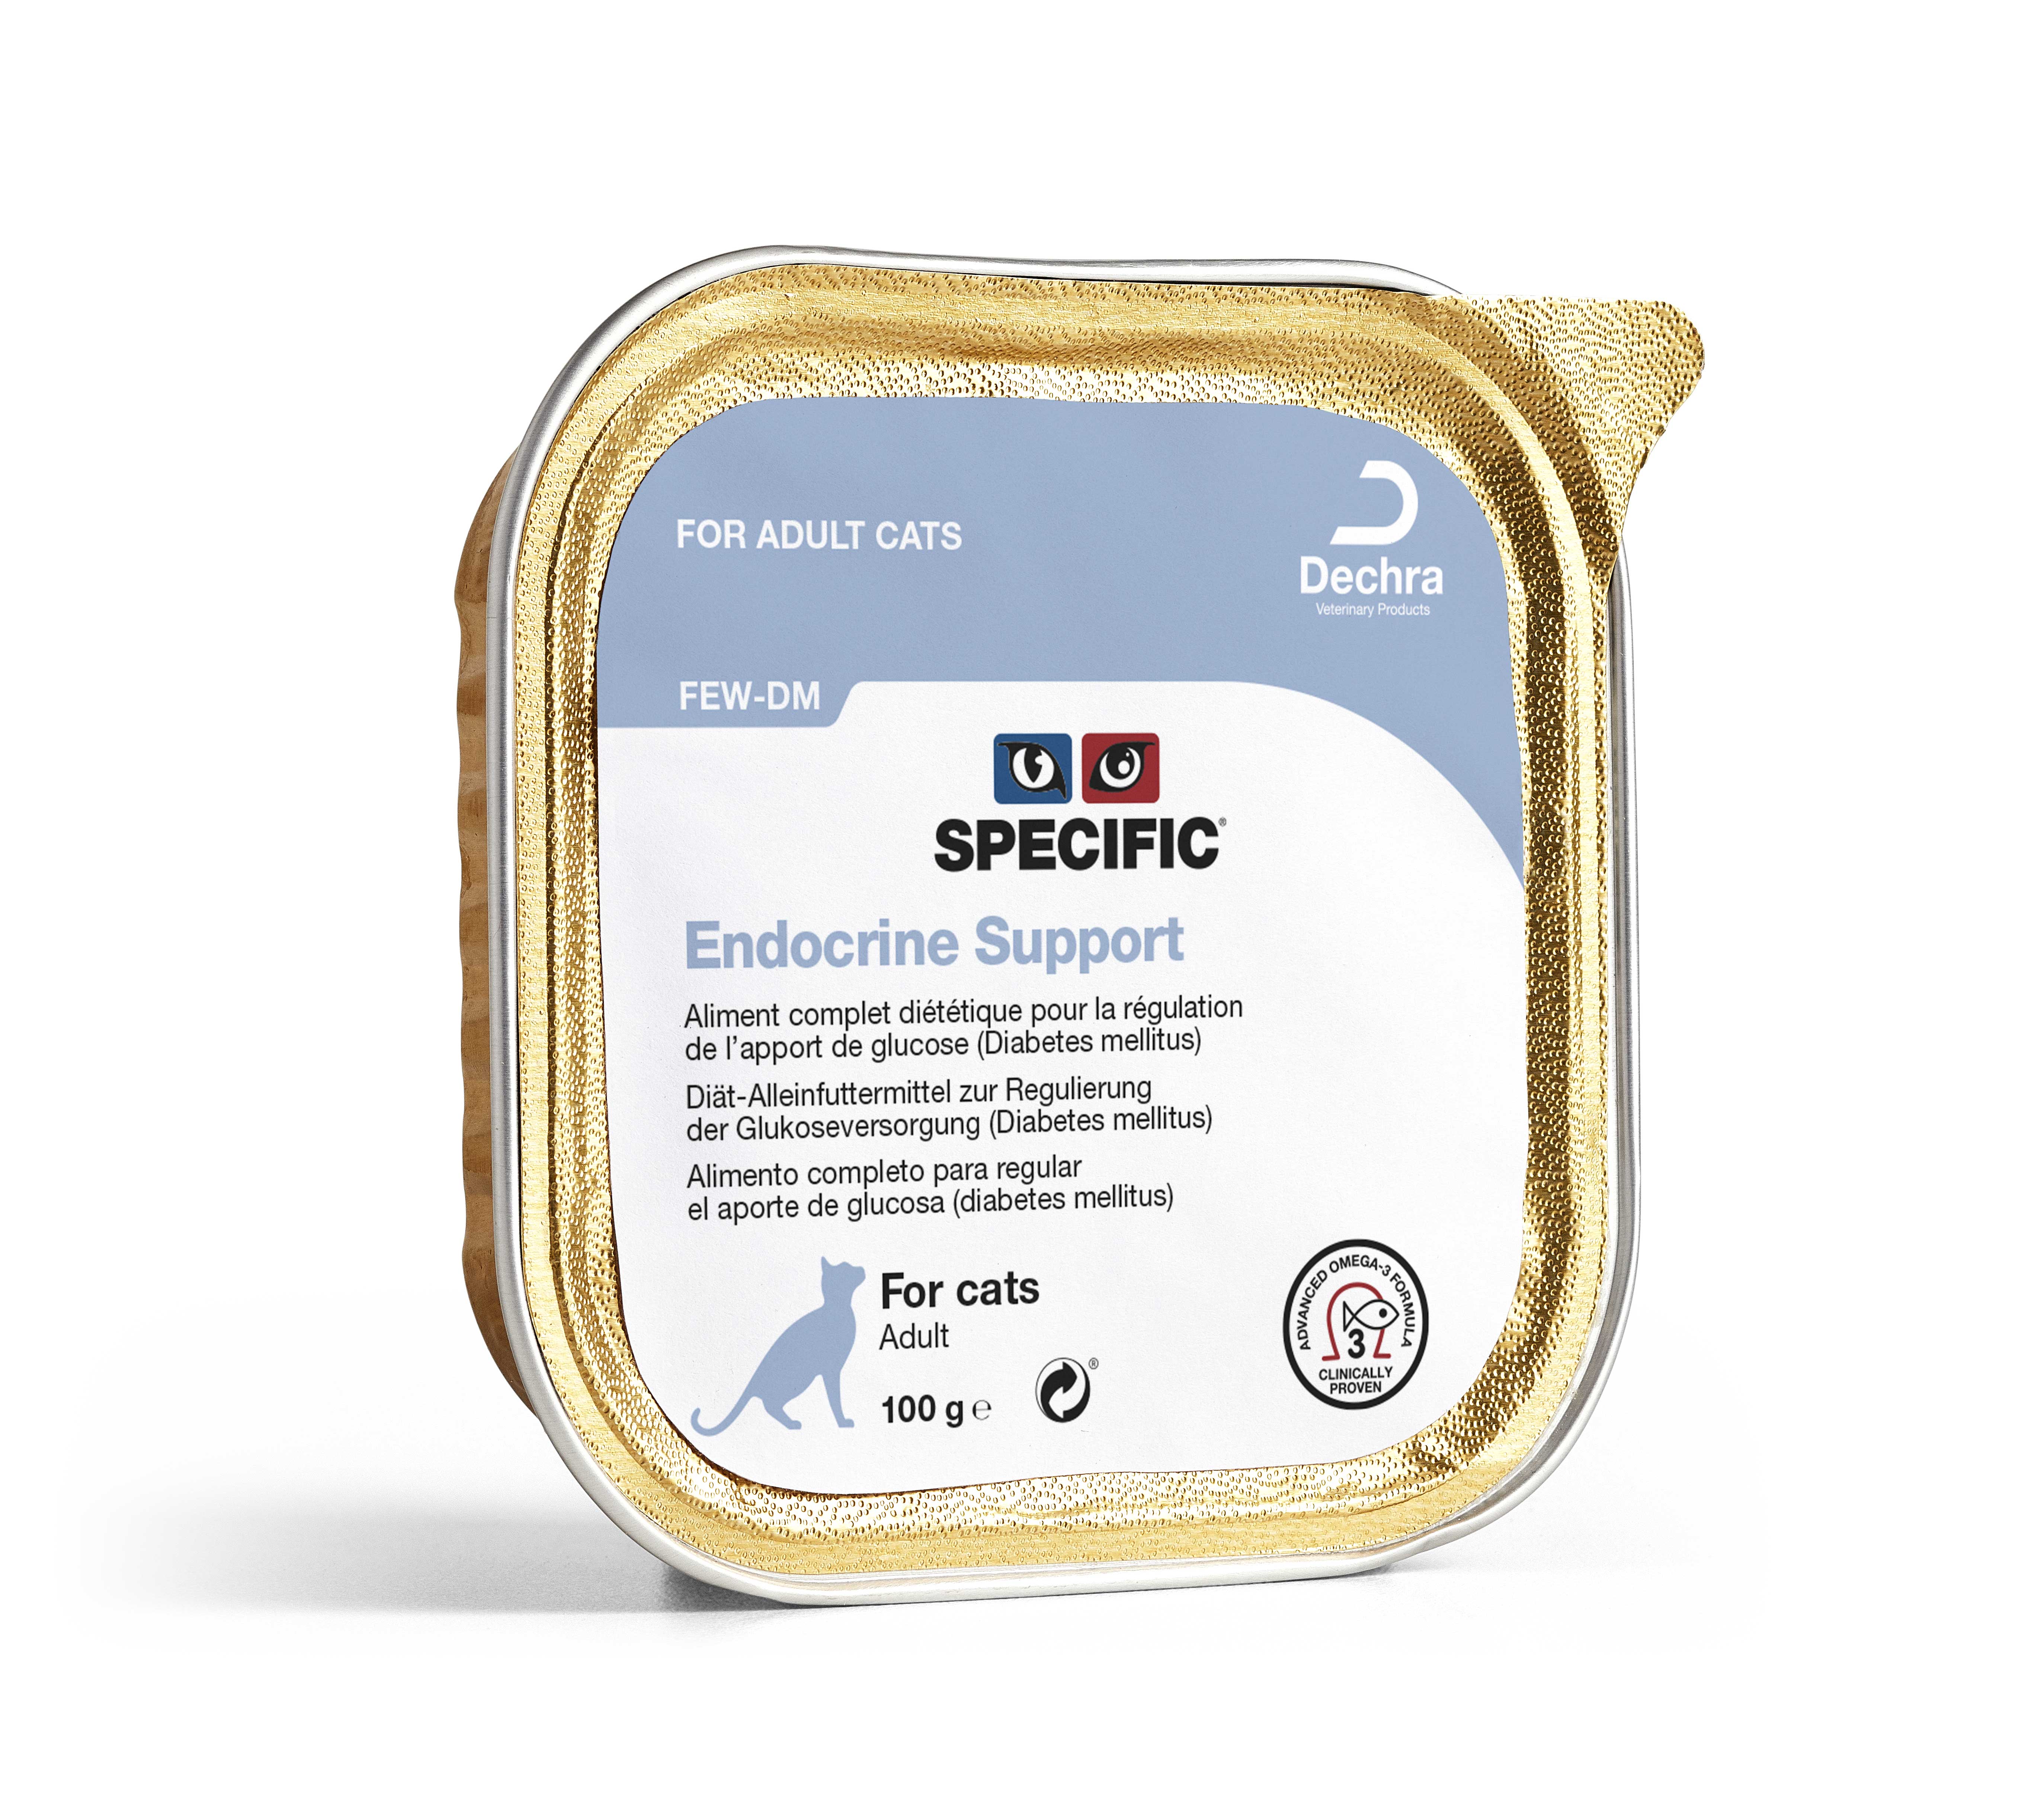 SPECIFIC FEW-DM Endocrine Support 7 x 100 g